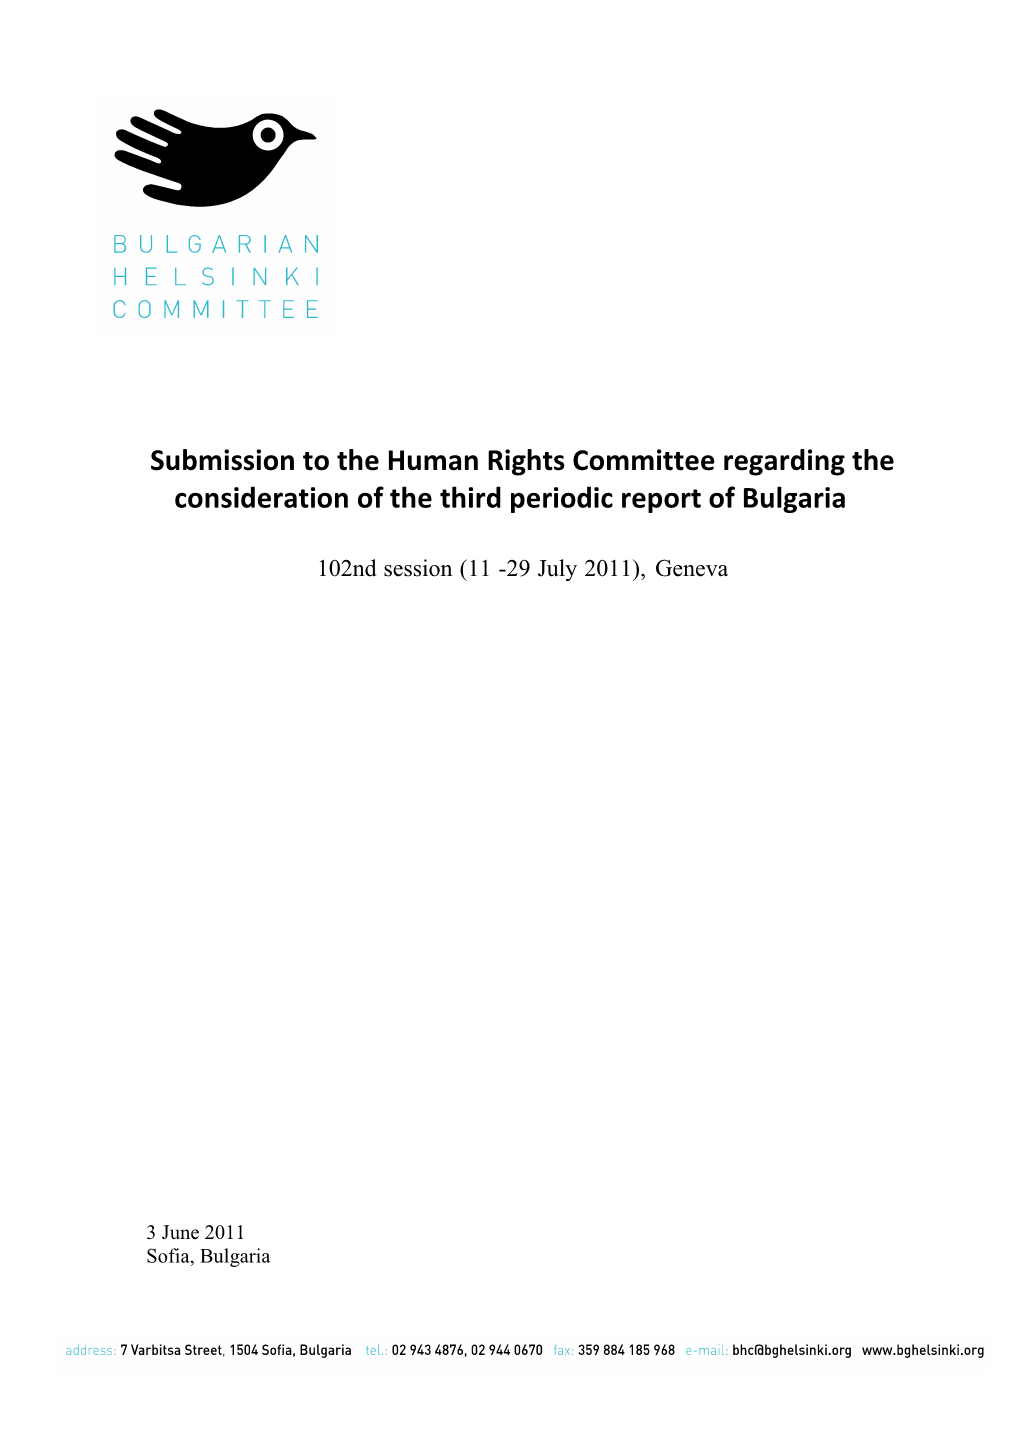 Submission to the Human Rights Committee Regarding the Consideration of the Third Periodic Report of Bulgaria